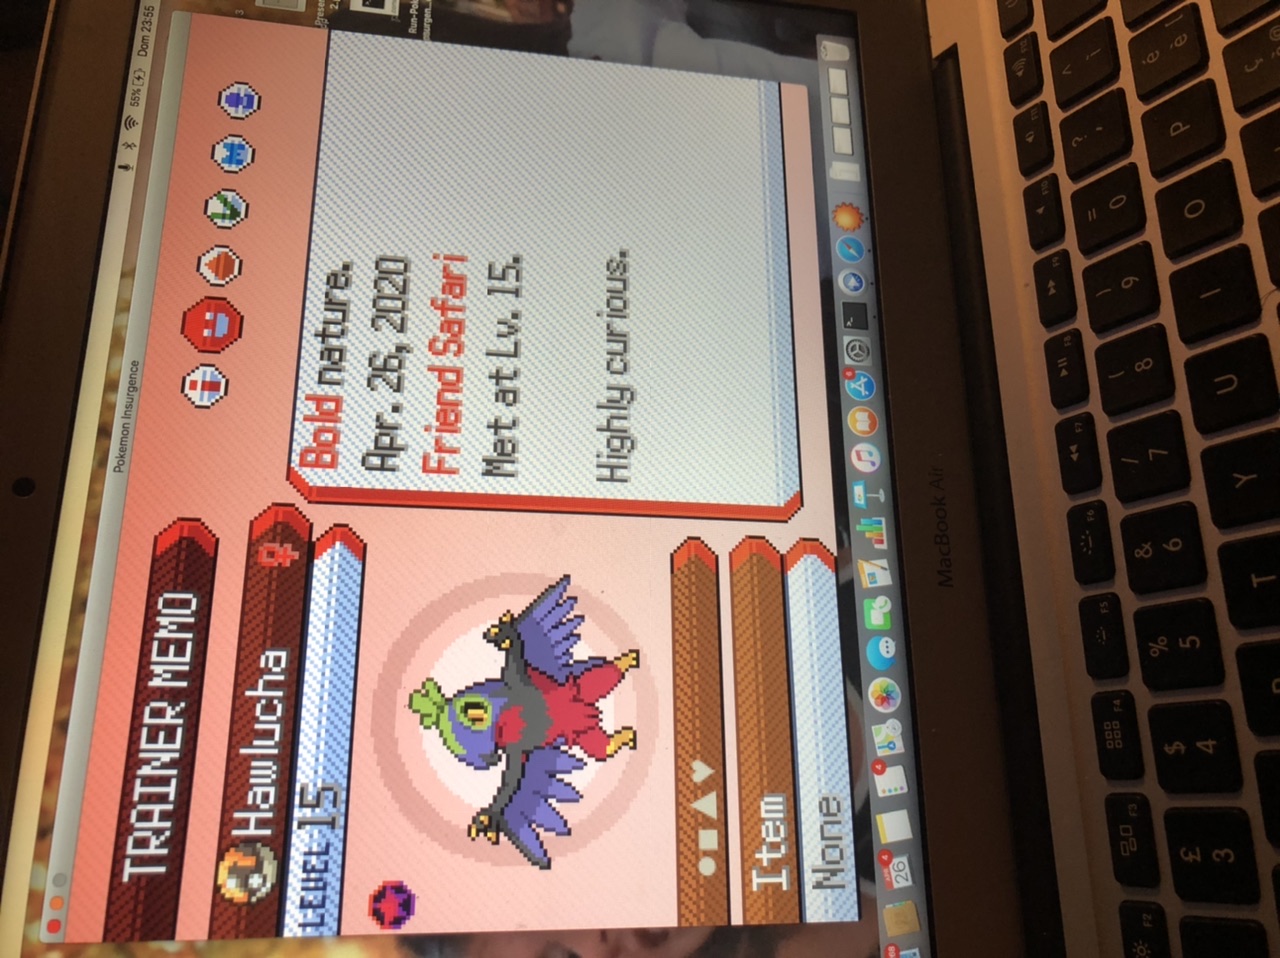 how to download pokemon insurgence on mac